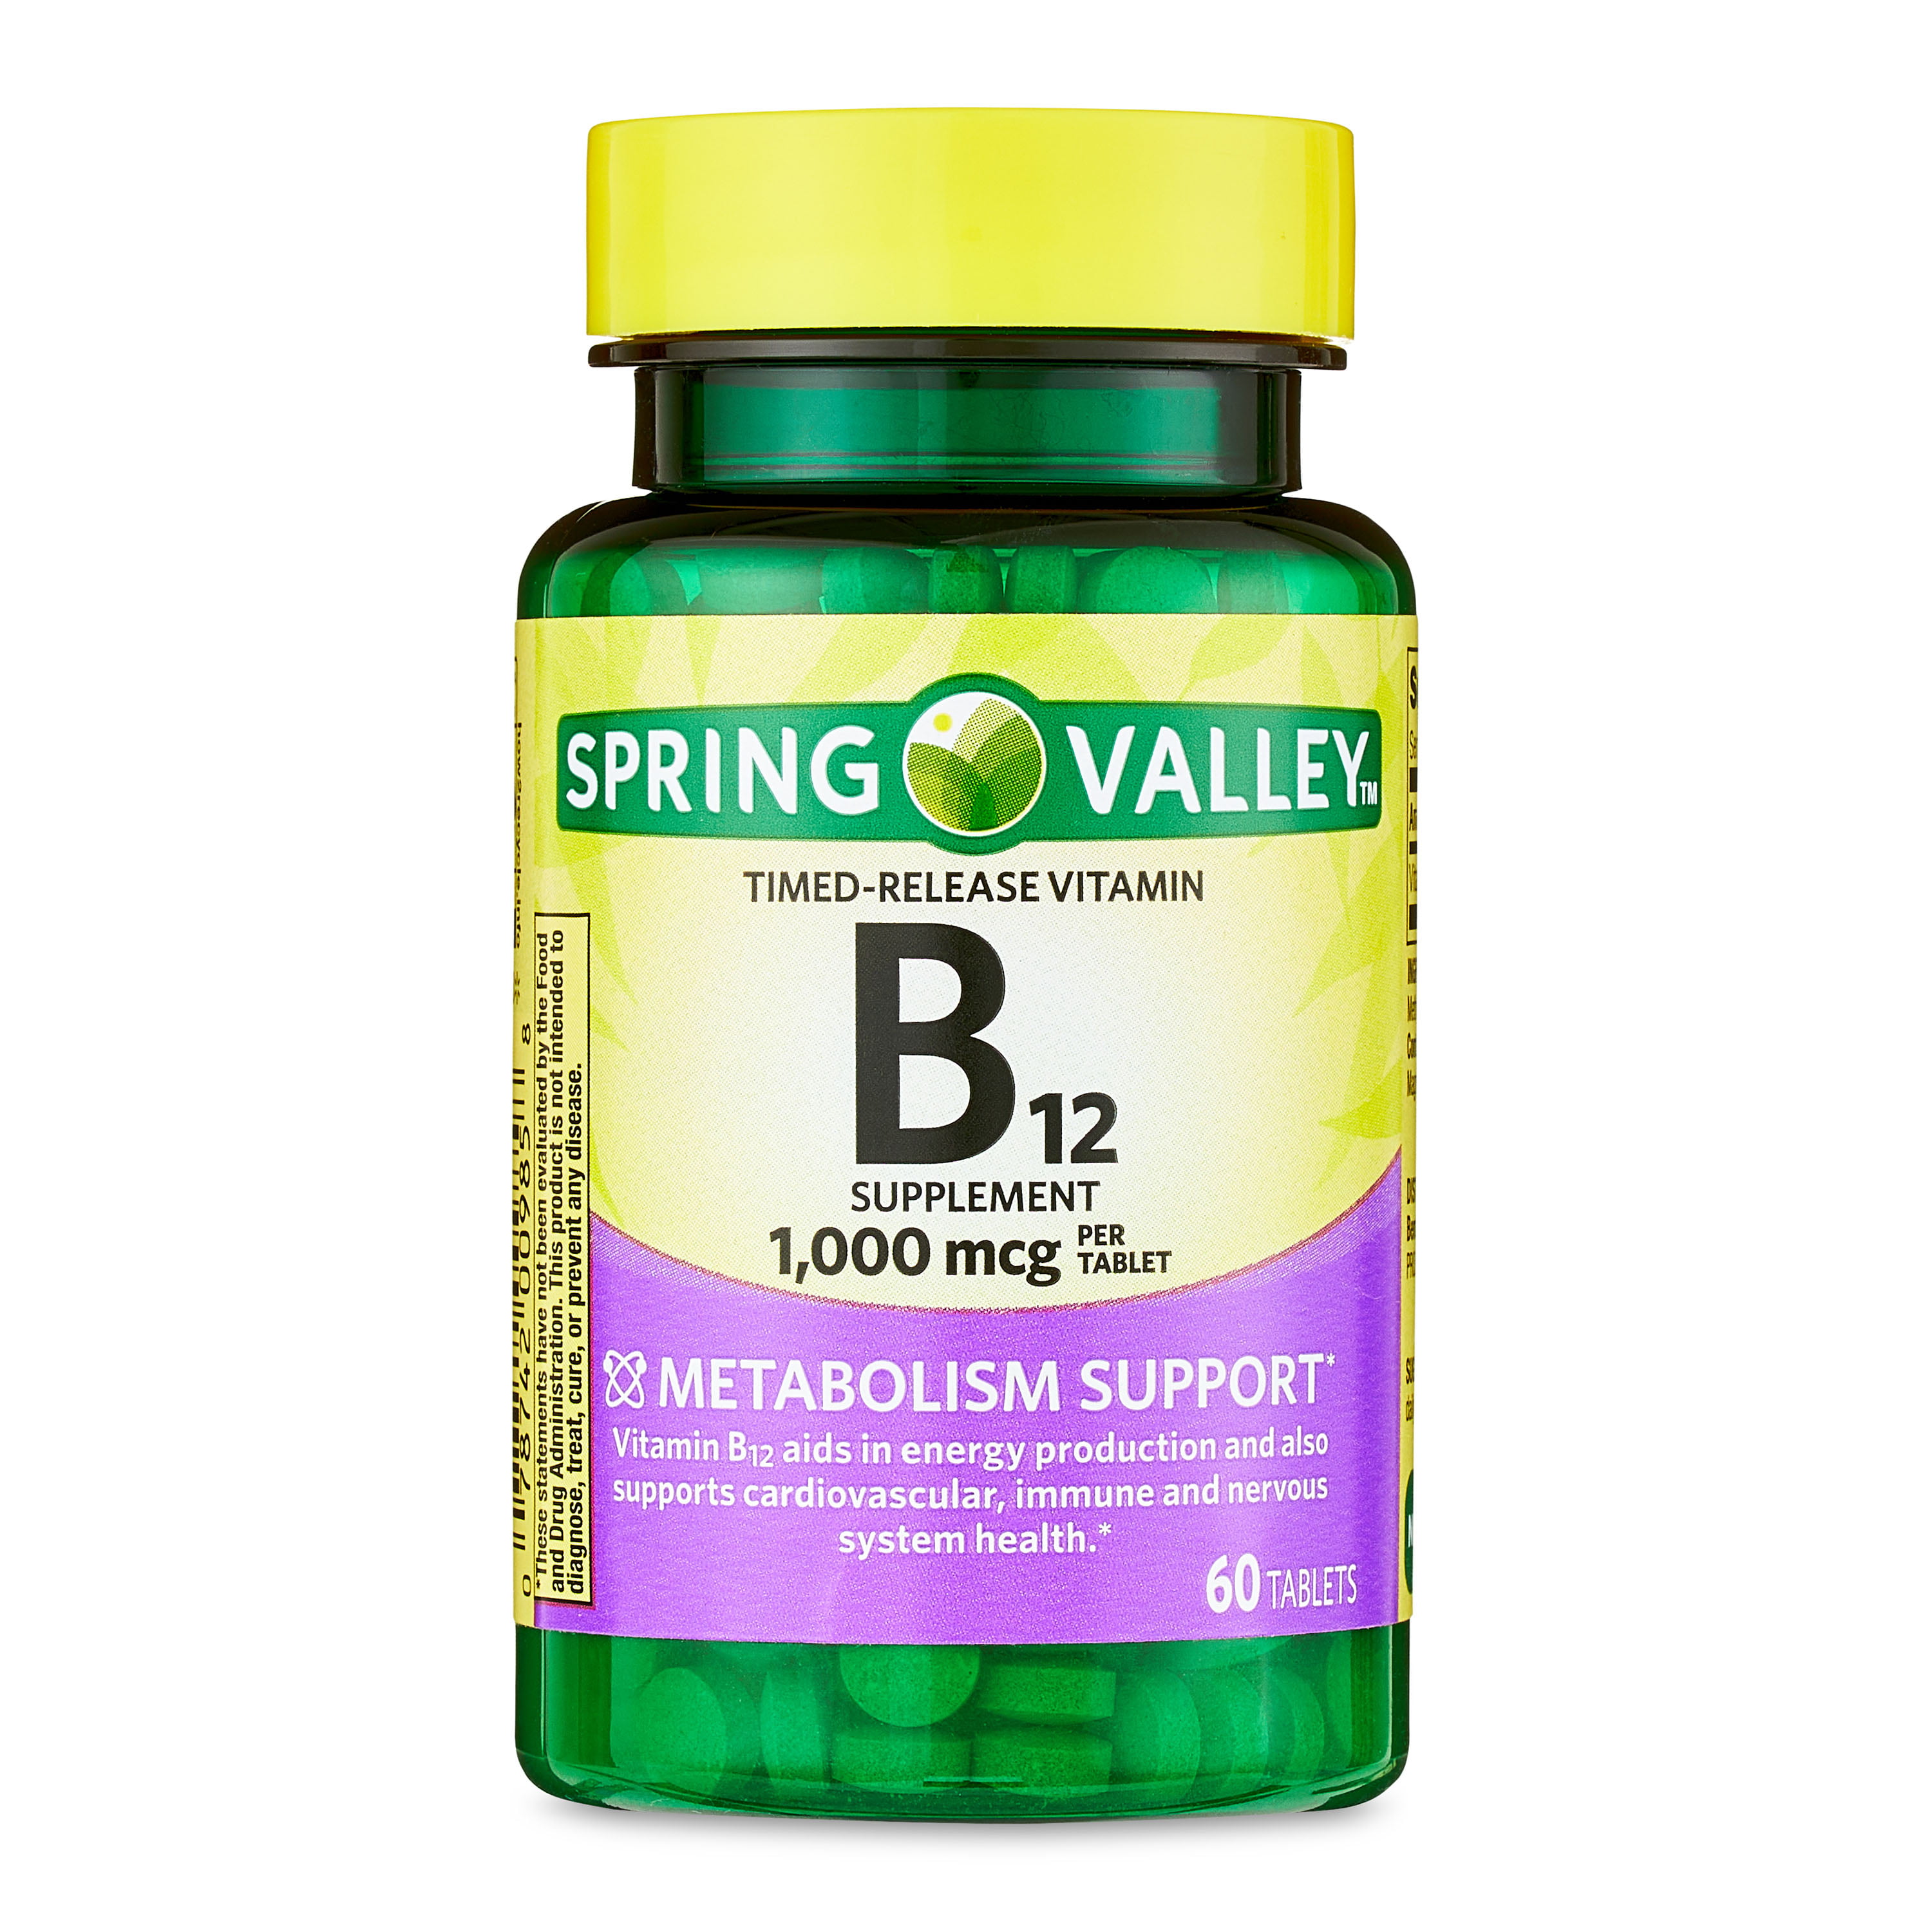 Timed-Release B12 Supplement - 60 Tablets